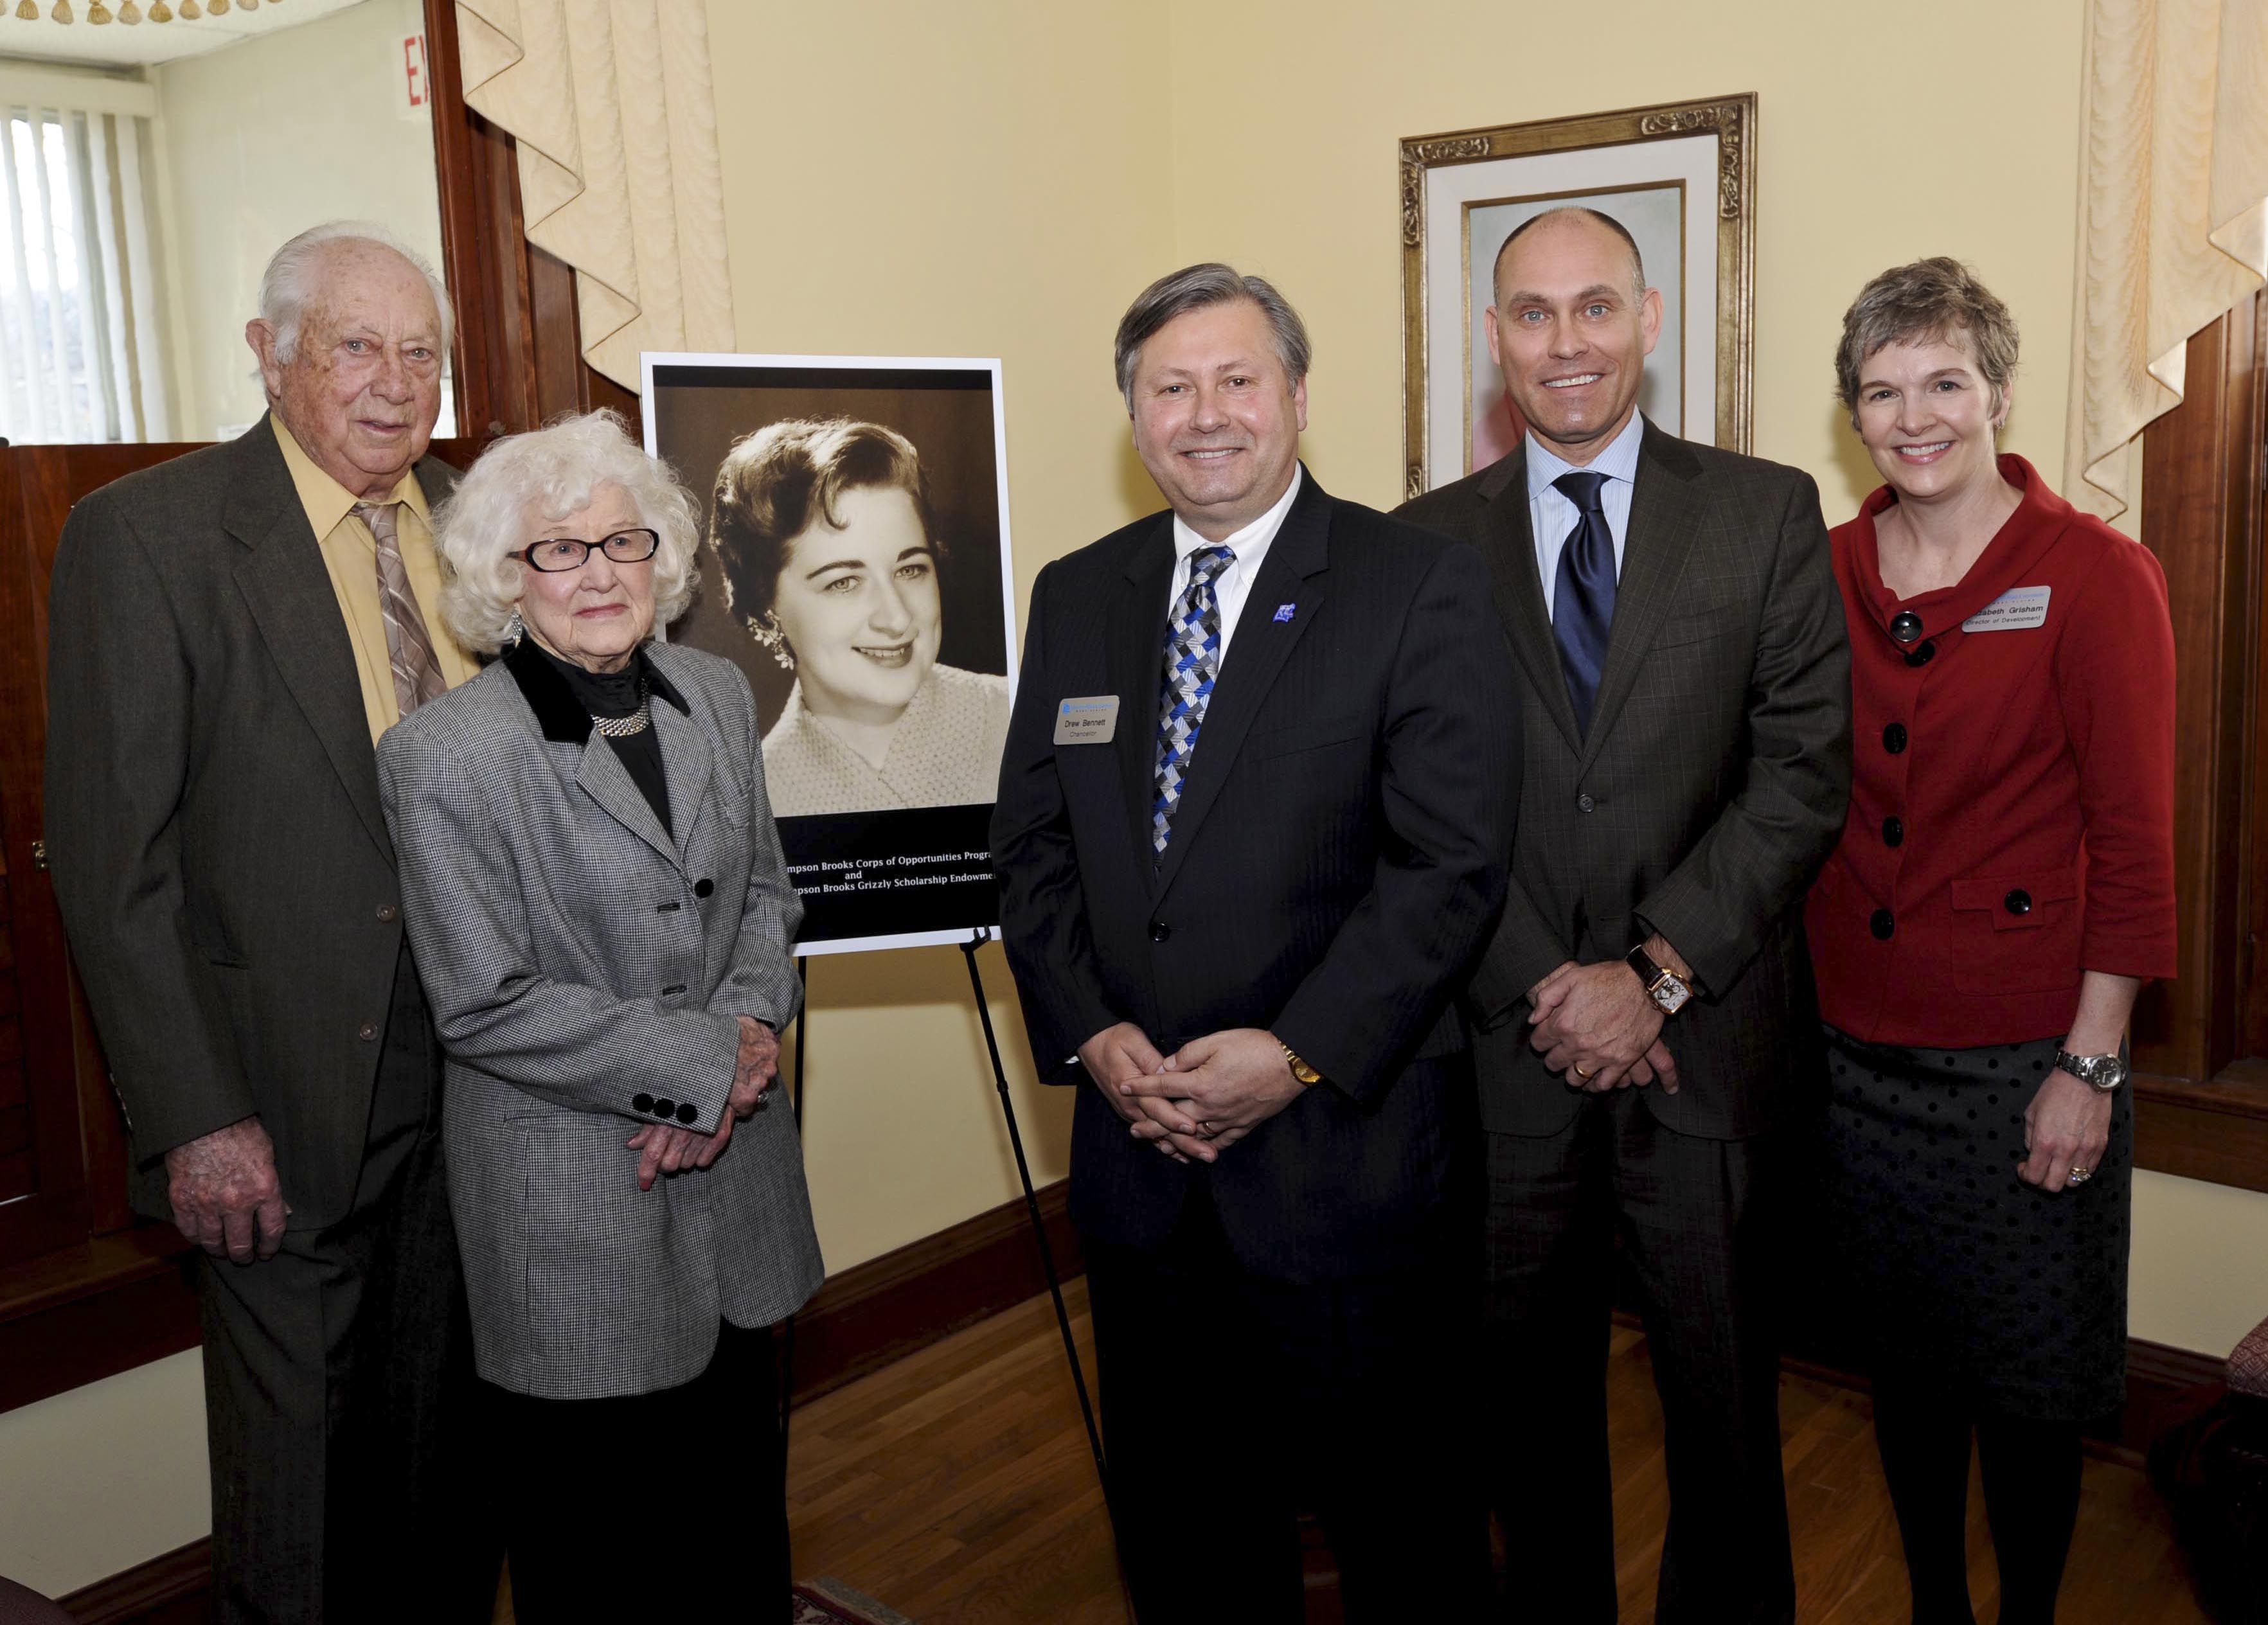 THE SINGLE LARGEST GIFT Missouri State University-West Plains has ever received and the single largest scholarship gift ever given to the Missouri State University system was announced at a press conference today, Feb. 23. The gift is from the Lorene Thompson Brooks estate. From left with a photo of Brooks are Brooks’ brother Bob Thompson and his wife, Eva, of West Plains; Missouri State-West Plains chancellor Drew Bennett; Missouri State University vice president for university advancement and executive director of the Foundation Brent Dunn; and Missouri State-West Plains director of development Elizabeth Grisham.